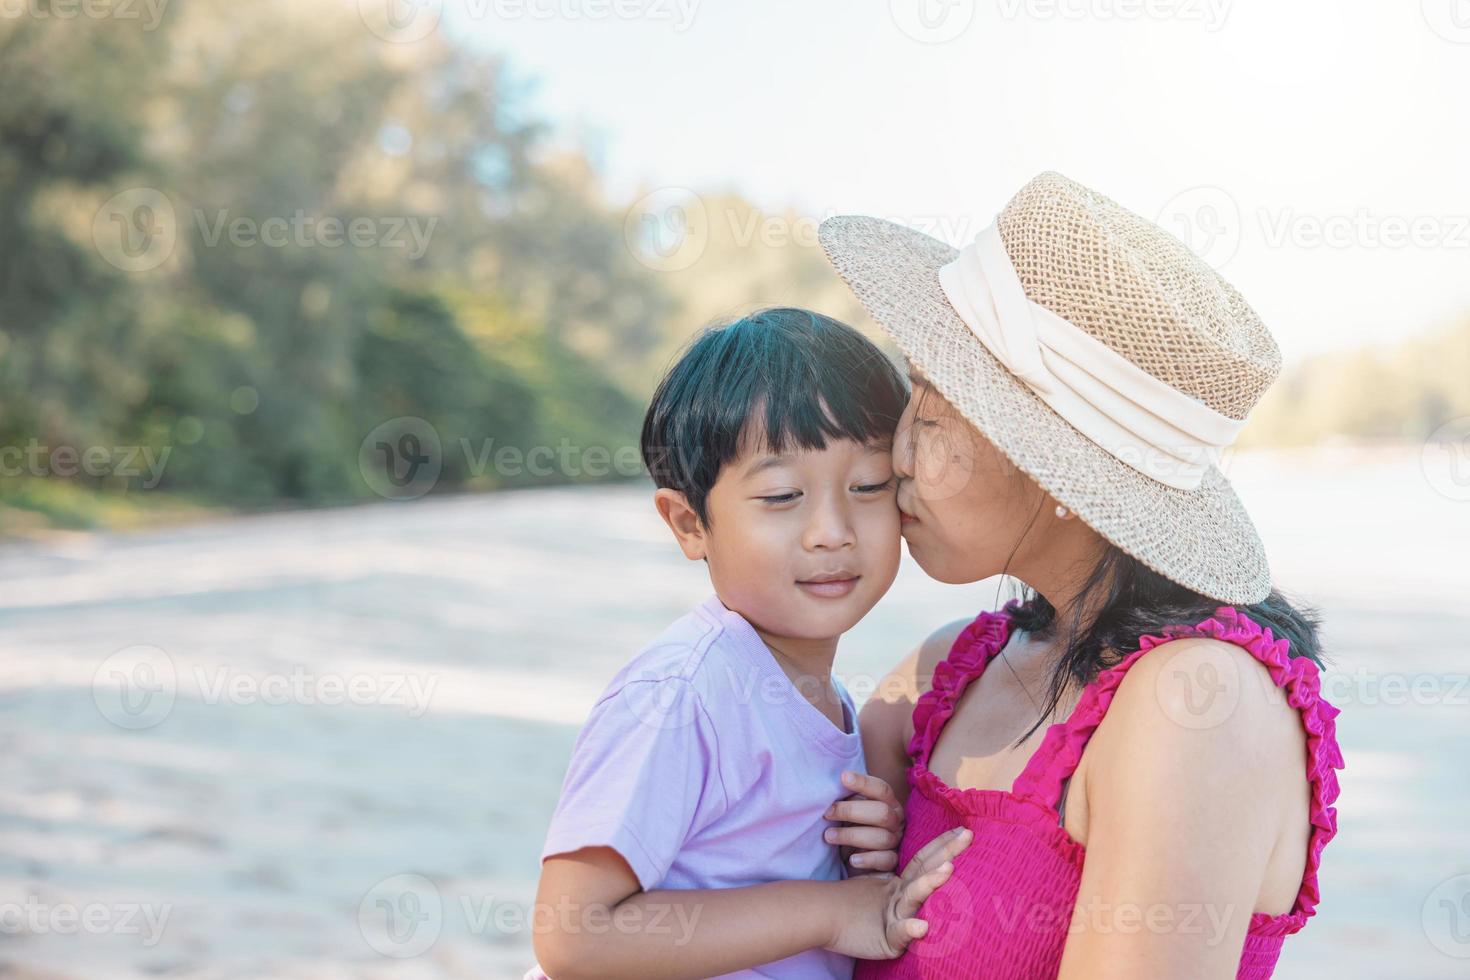 Asian boy and mom woman relaxing on tropical beach, they are njoy freedom and fresh air, wearing stylish hat and clothes. Happy smiling tourist in tropics in travel vacation photo